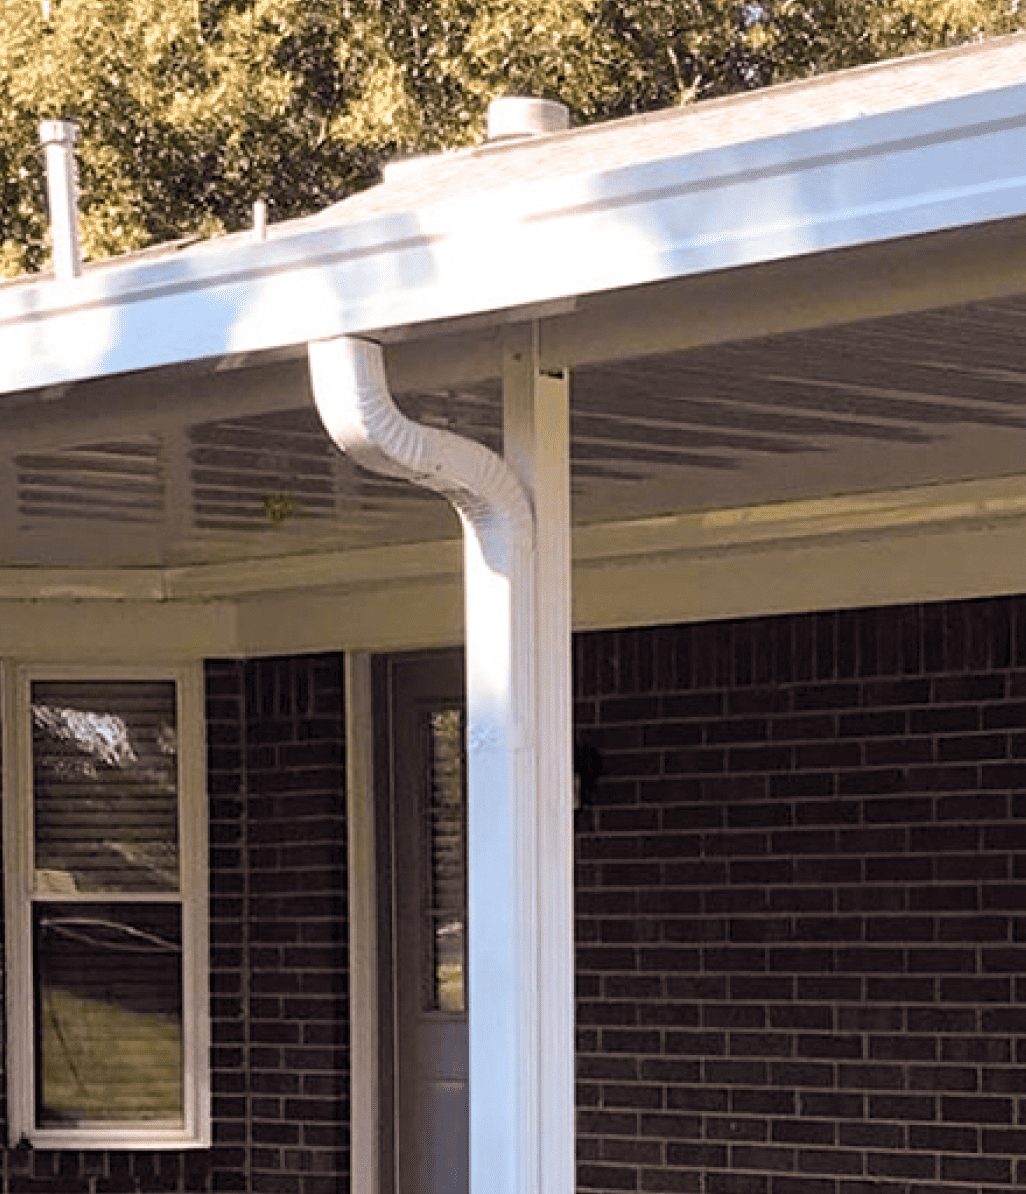 Gutters and Gutter Guards gutter cleaning and repair